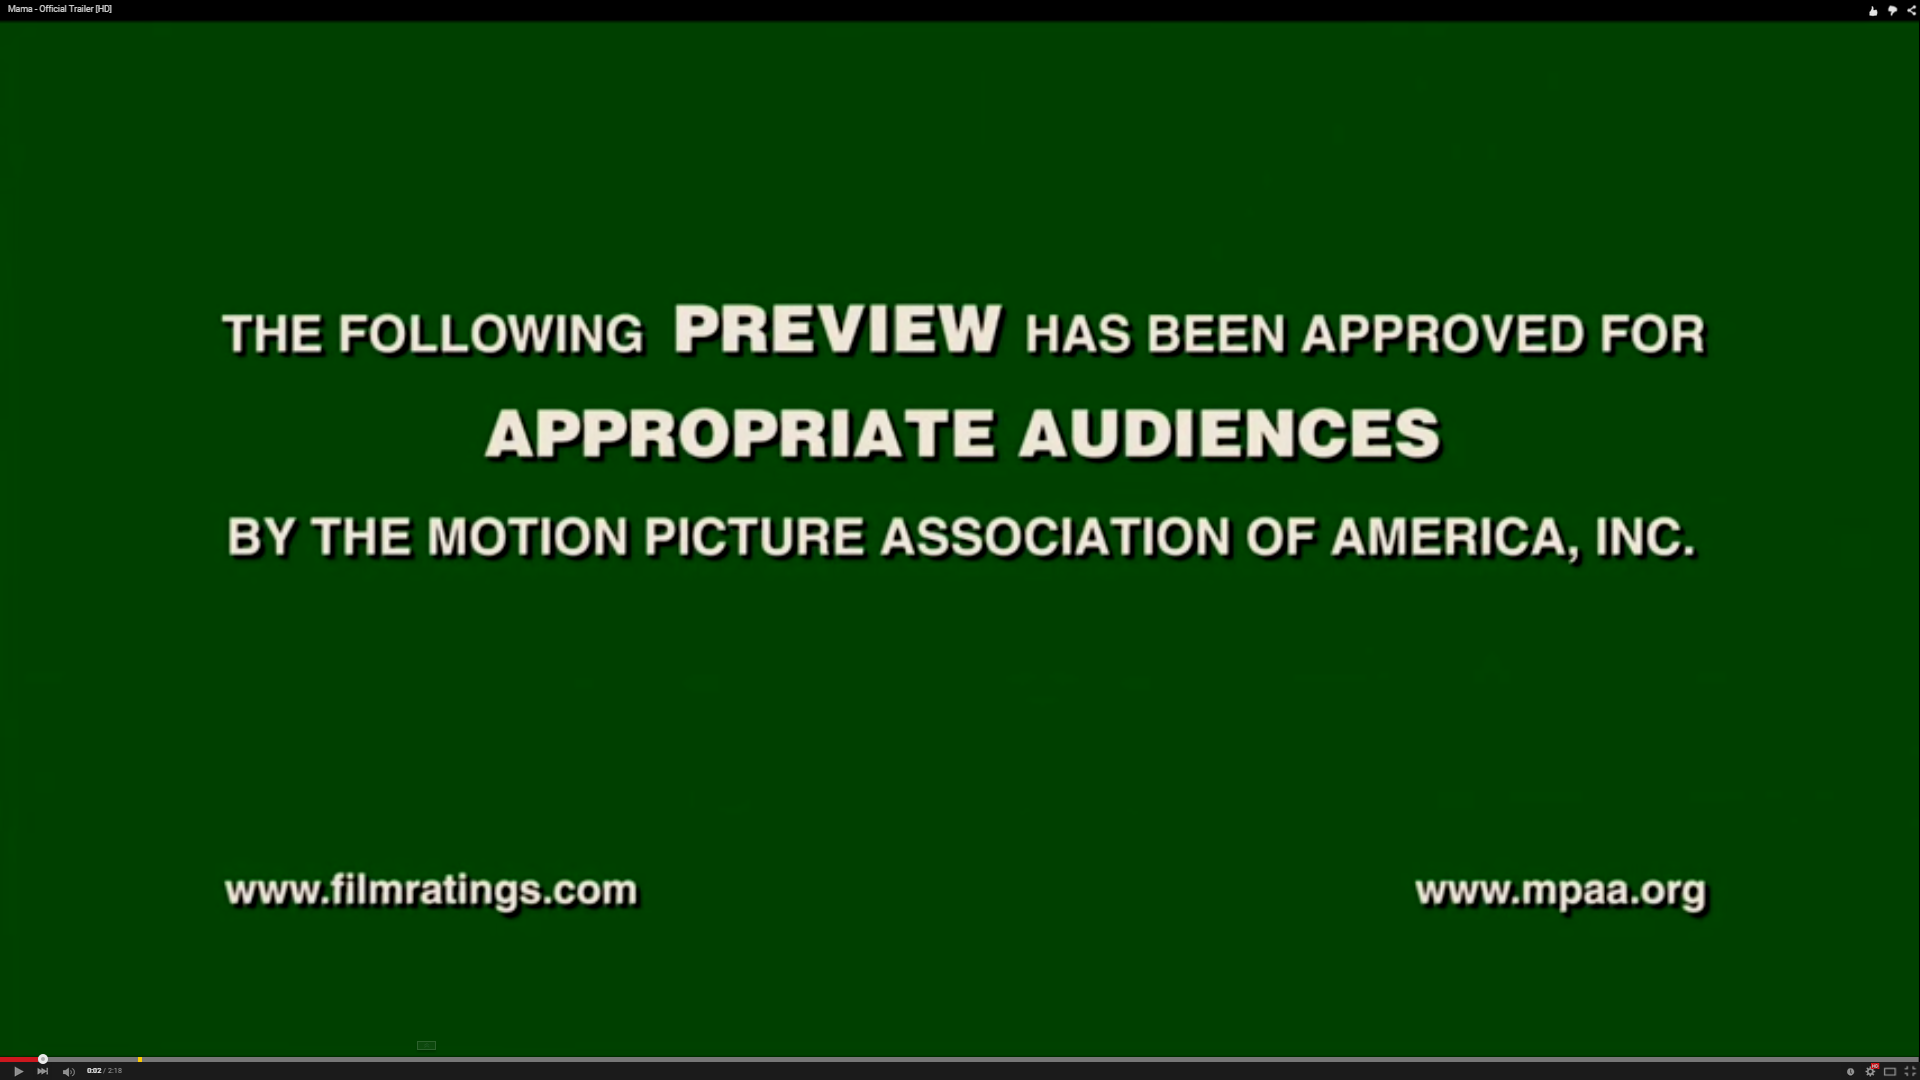 Appropriate audiences. The following Preview has been approved for all audiences PG.